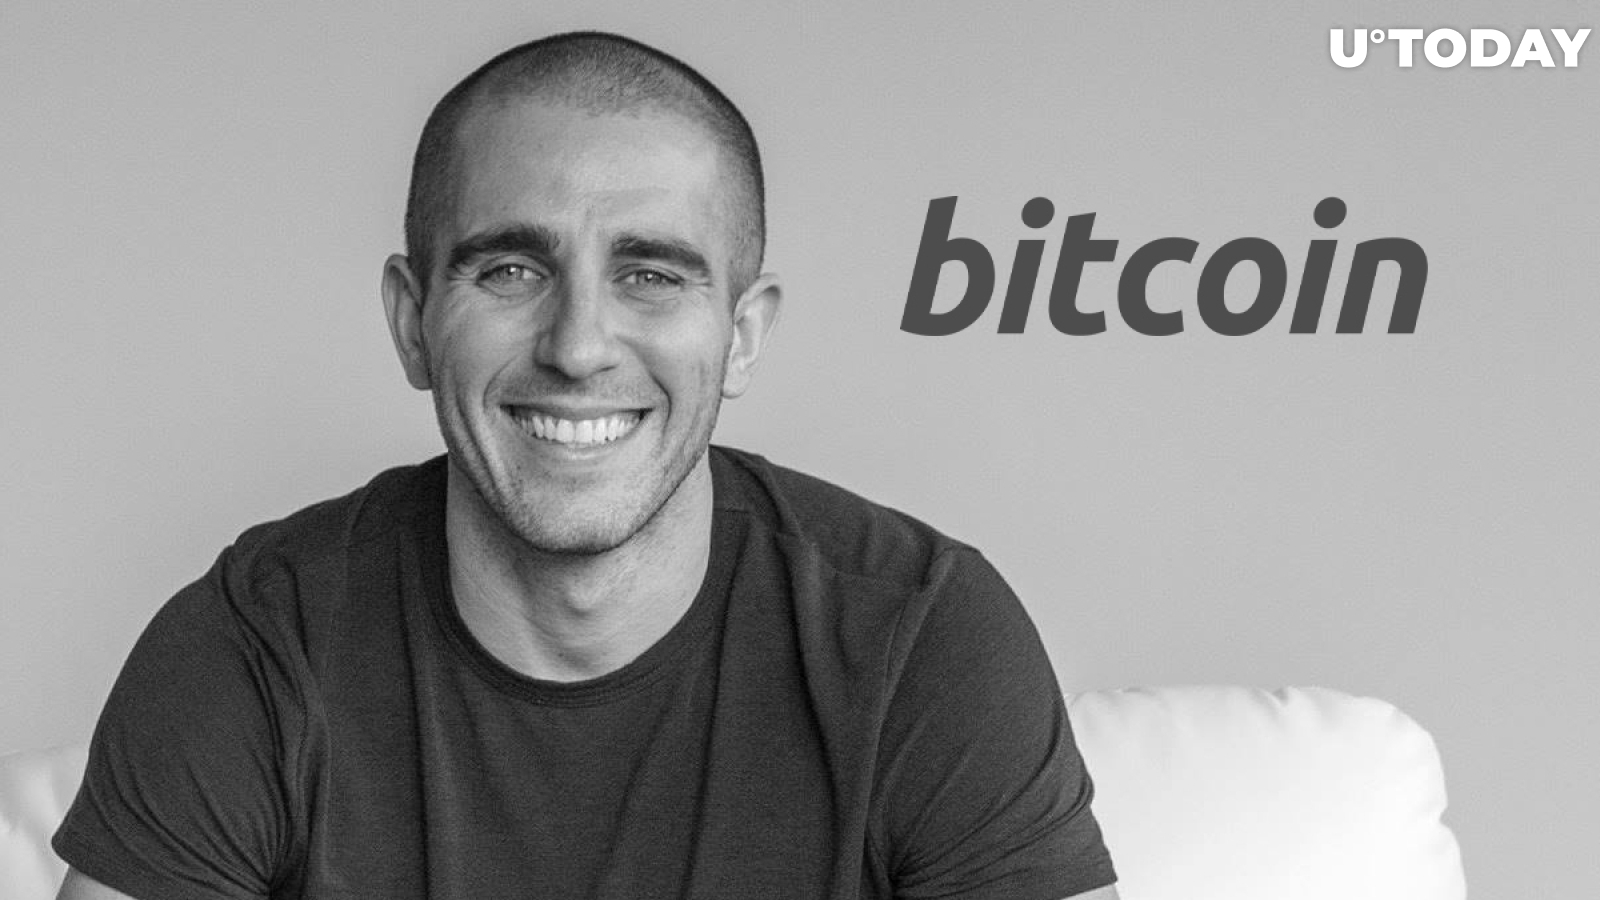 Bitcoin Has Outperformed All Other Asset Classes This Year: Anthony Pompliano